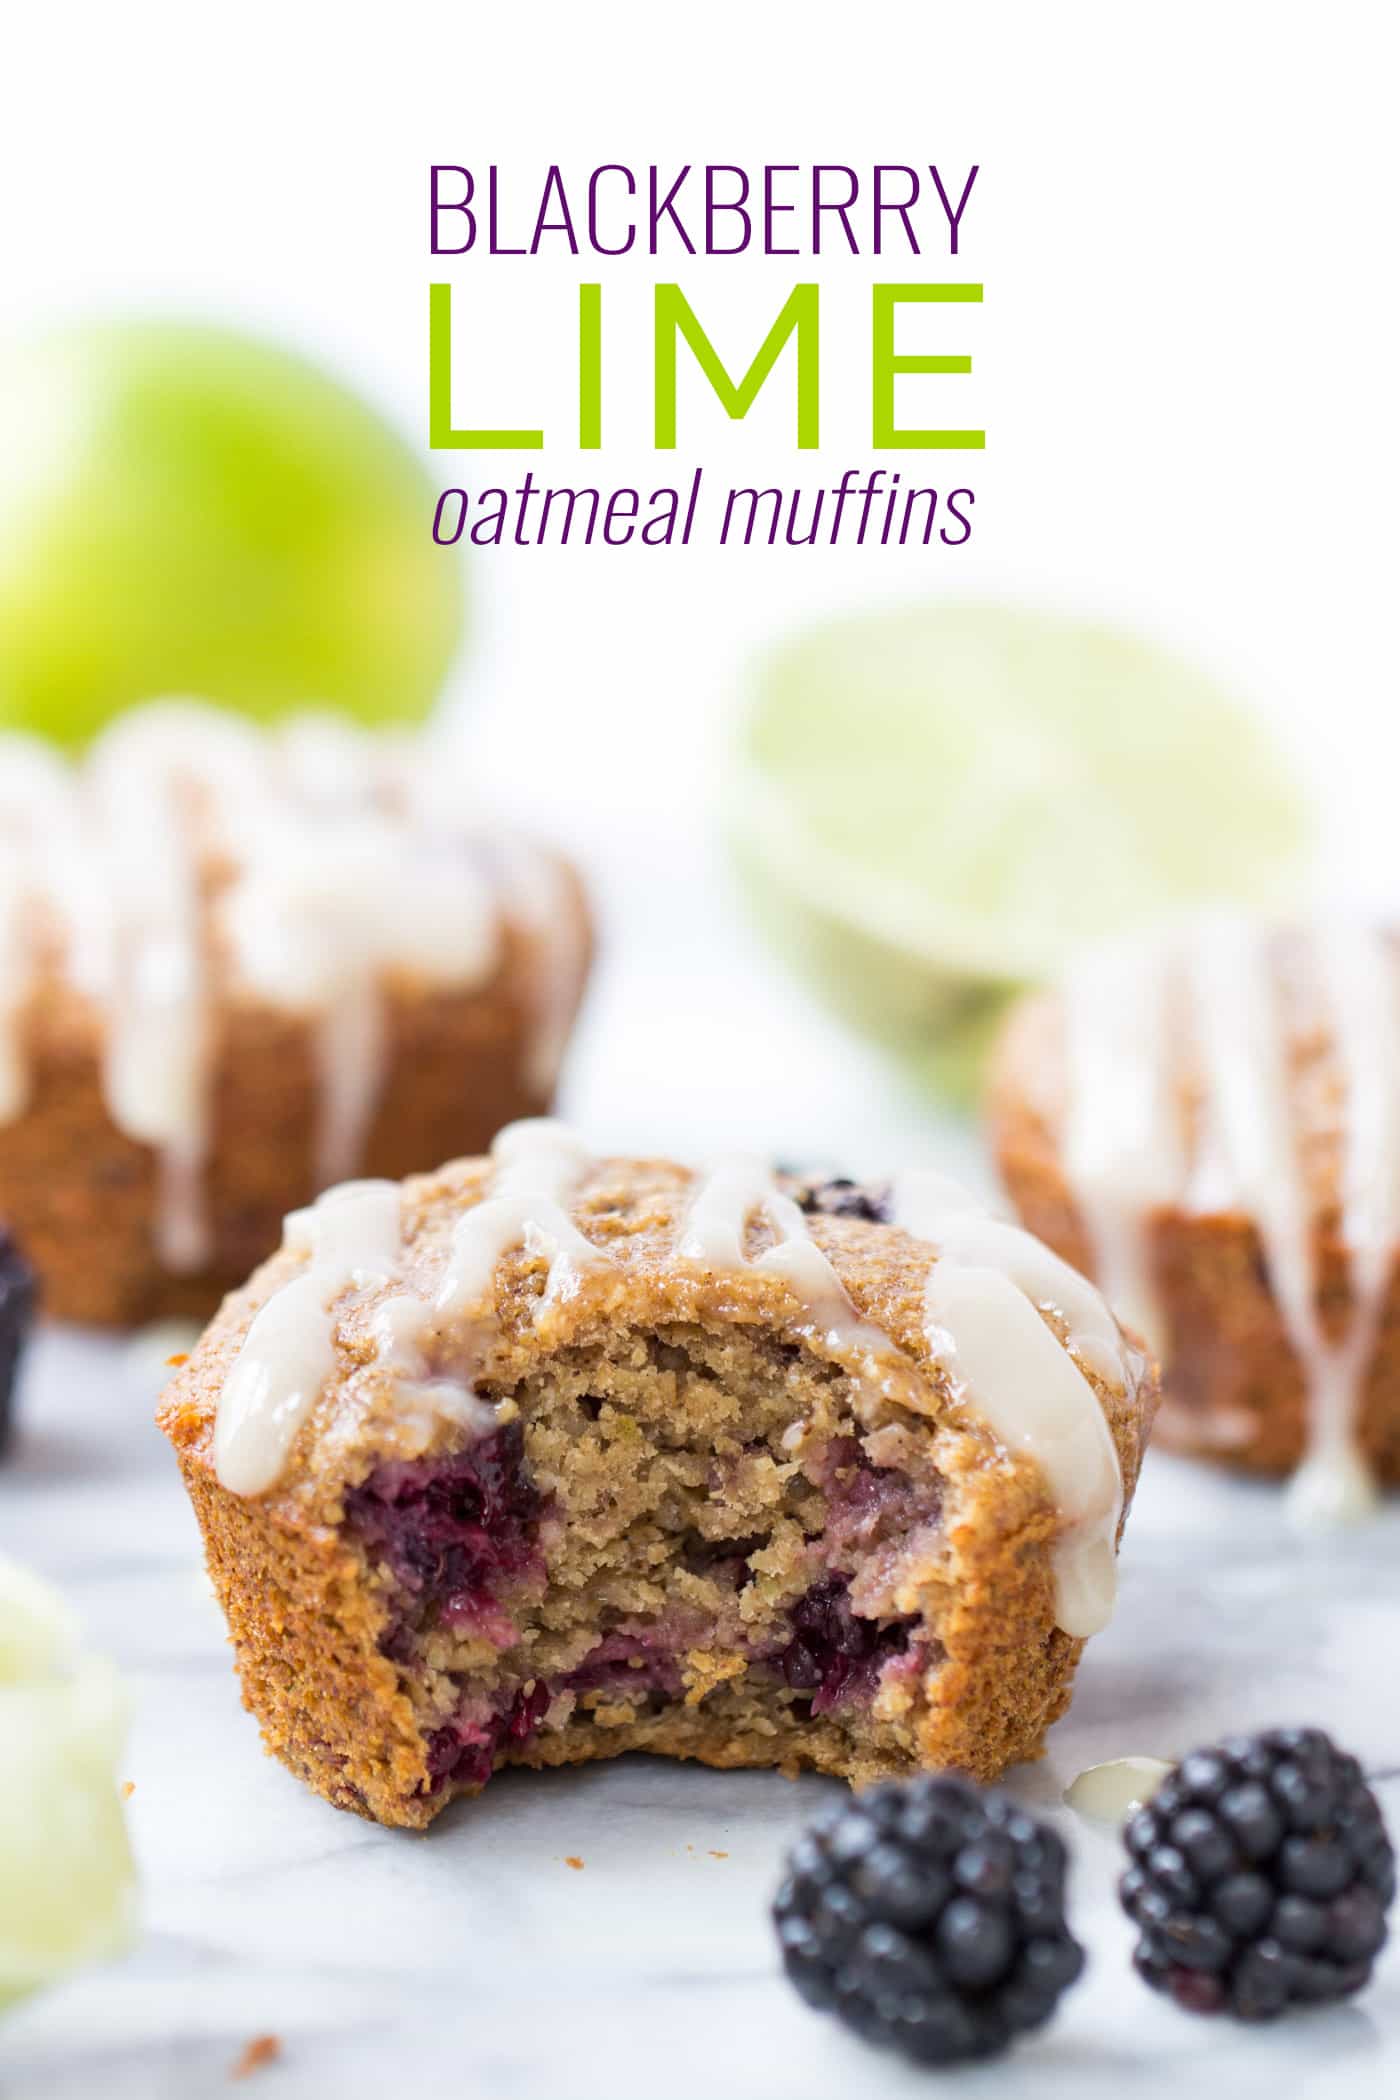 BLACKBERRY LIME OATMEAL MUFFINS -- healthy, delicious and so flavorful!